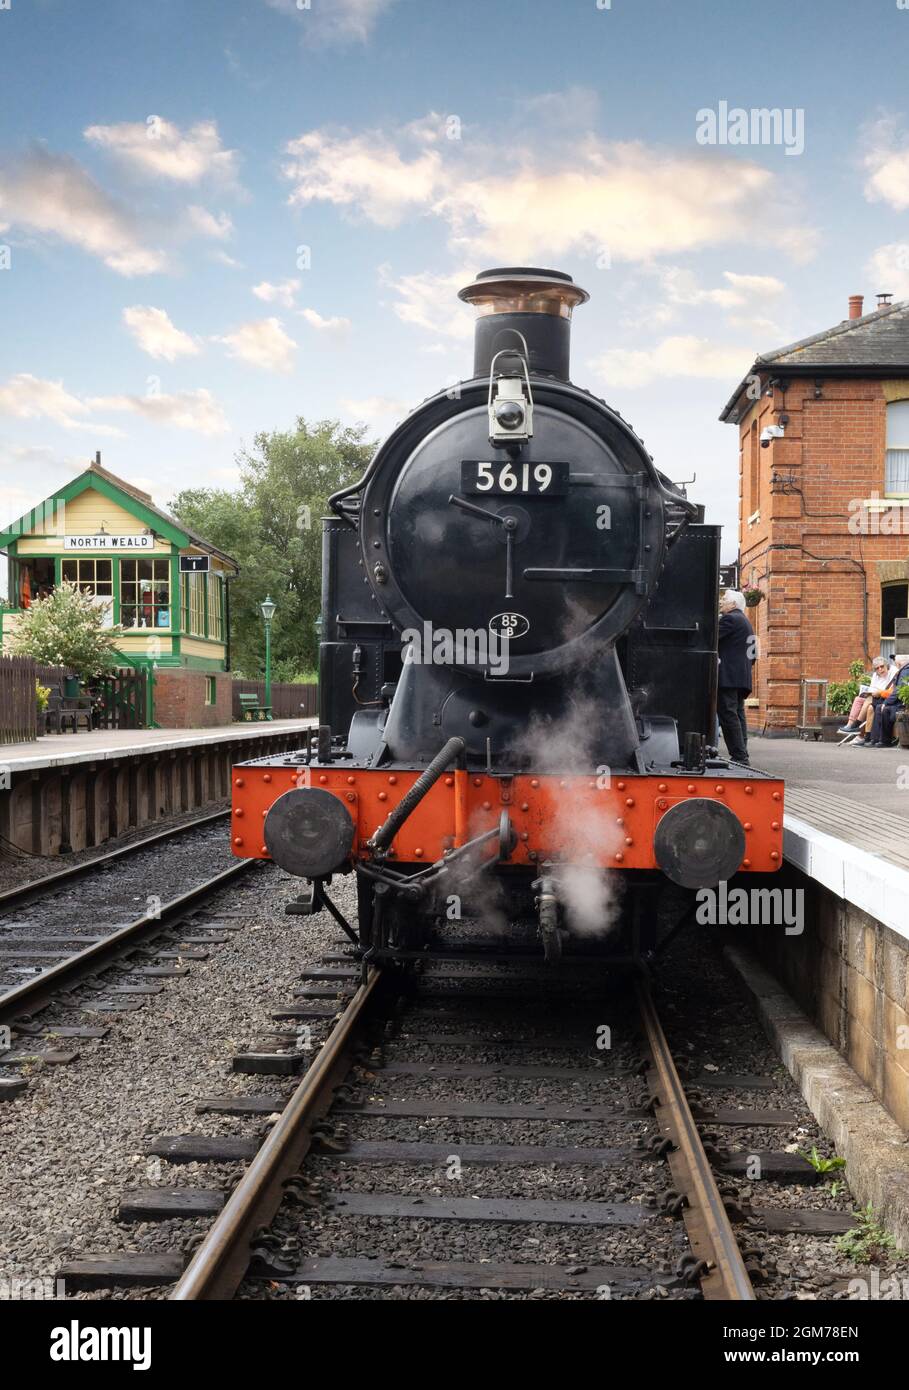 Epping Ongar railway,  A heritage railway.  A steam train in North Weald Station, with steam engine, Epping, Essex UK Stock Photo